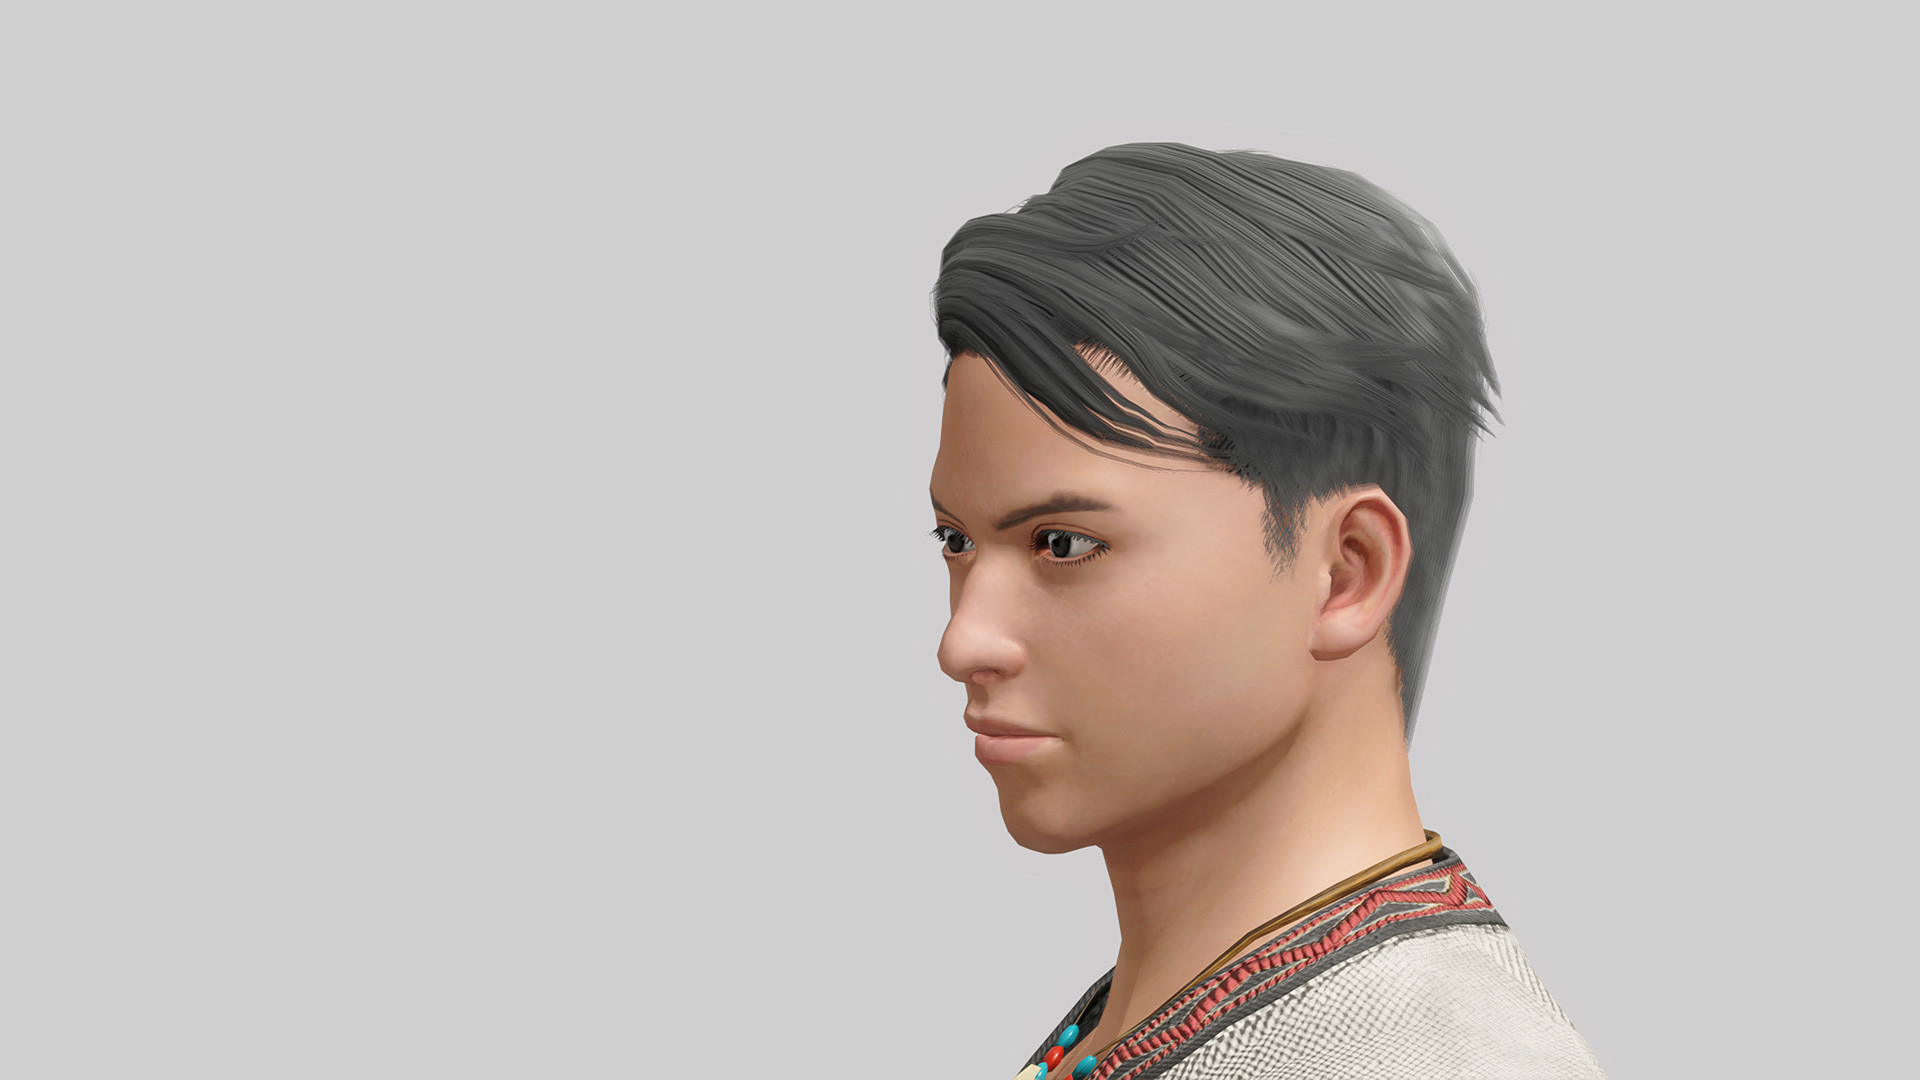 MONSTER HUNTER RISE - "Noble Short" hairstyle Featured Screenshot #1